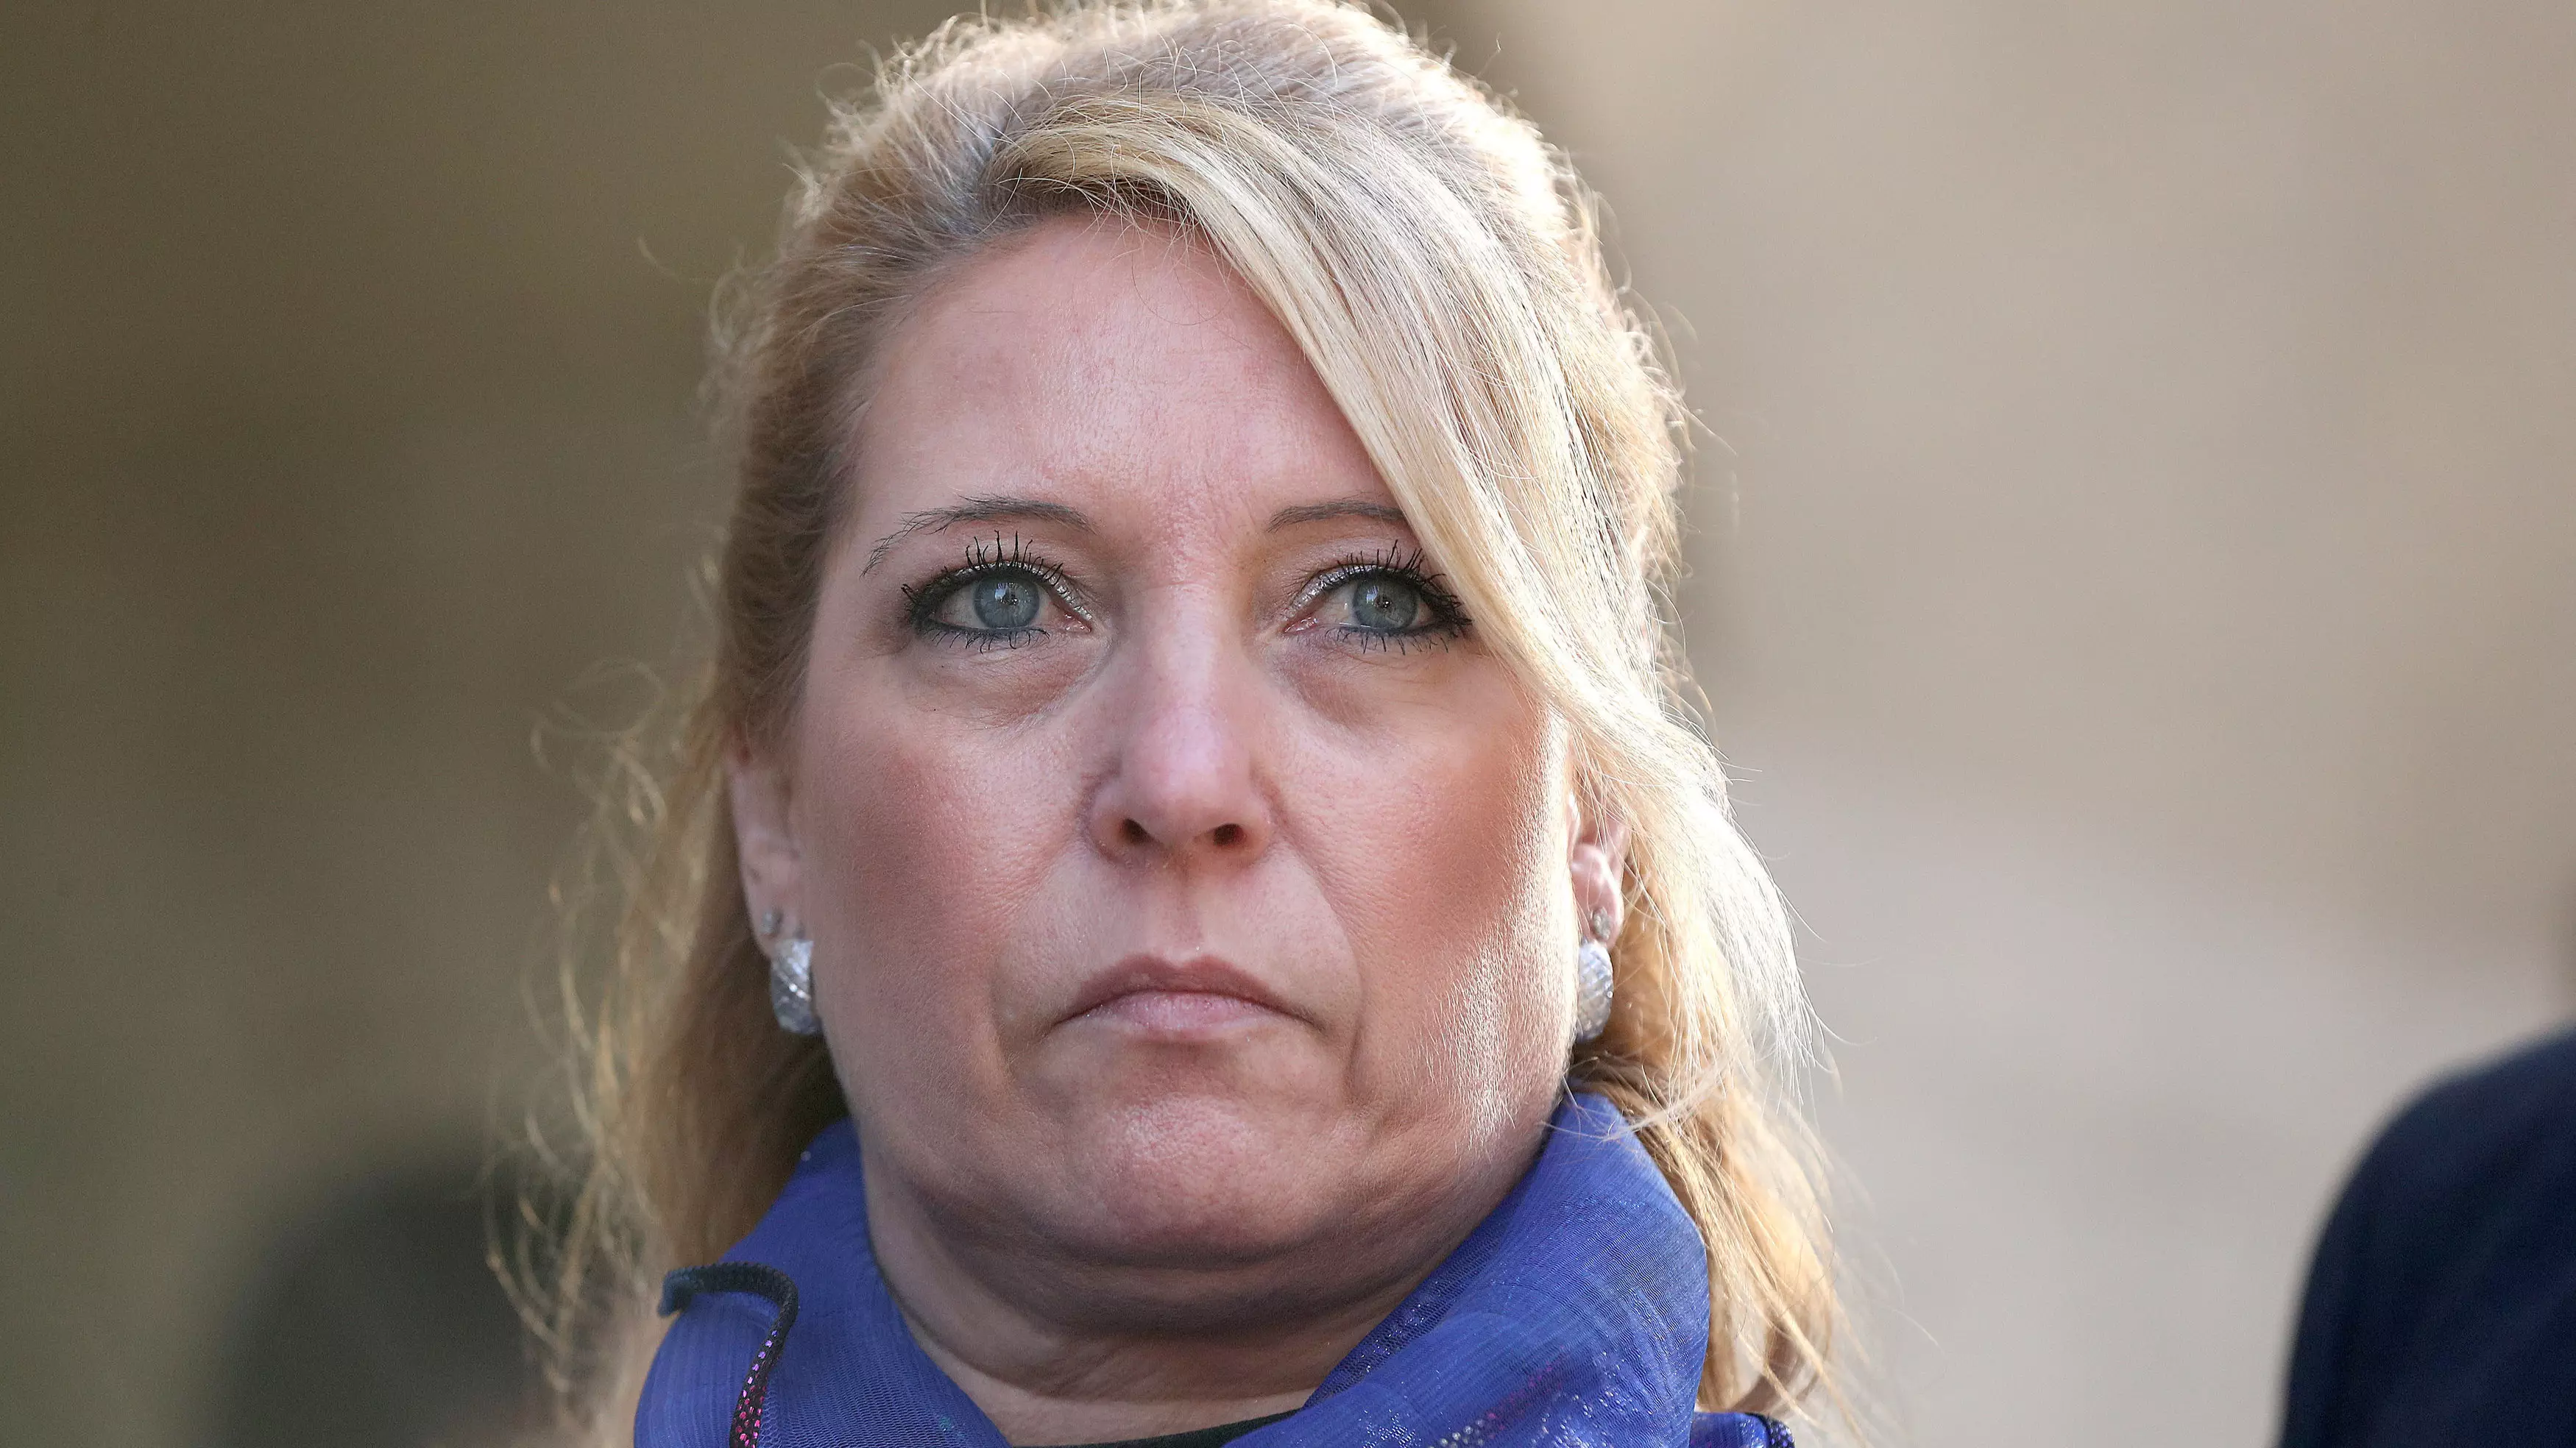 James Bulger’s Mum Has Only Just Learnt Truth About Son's Sexual Injuries And Demands Public Inquiry 